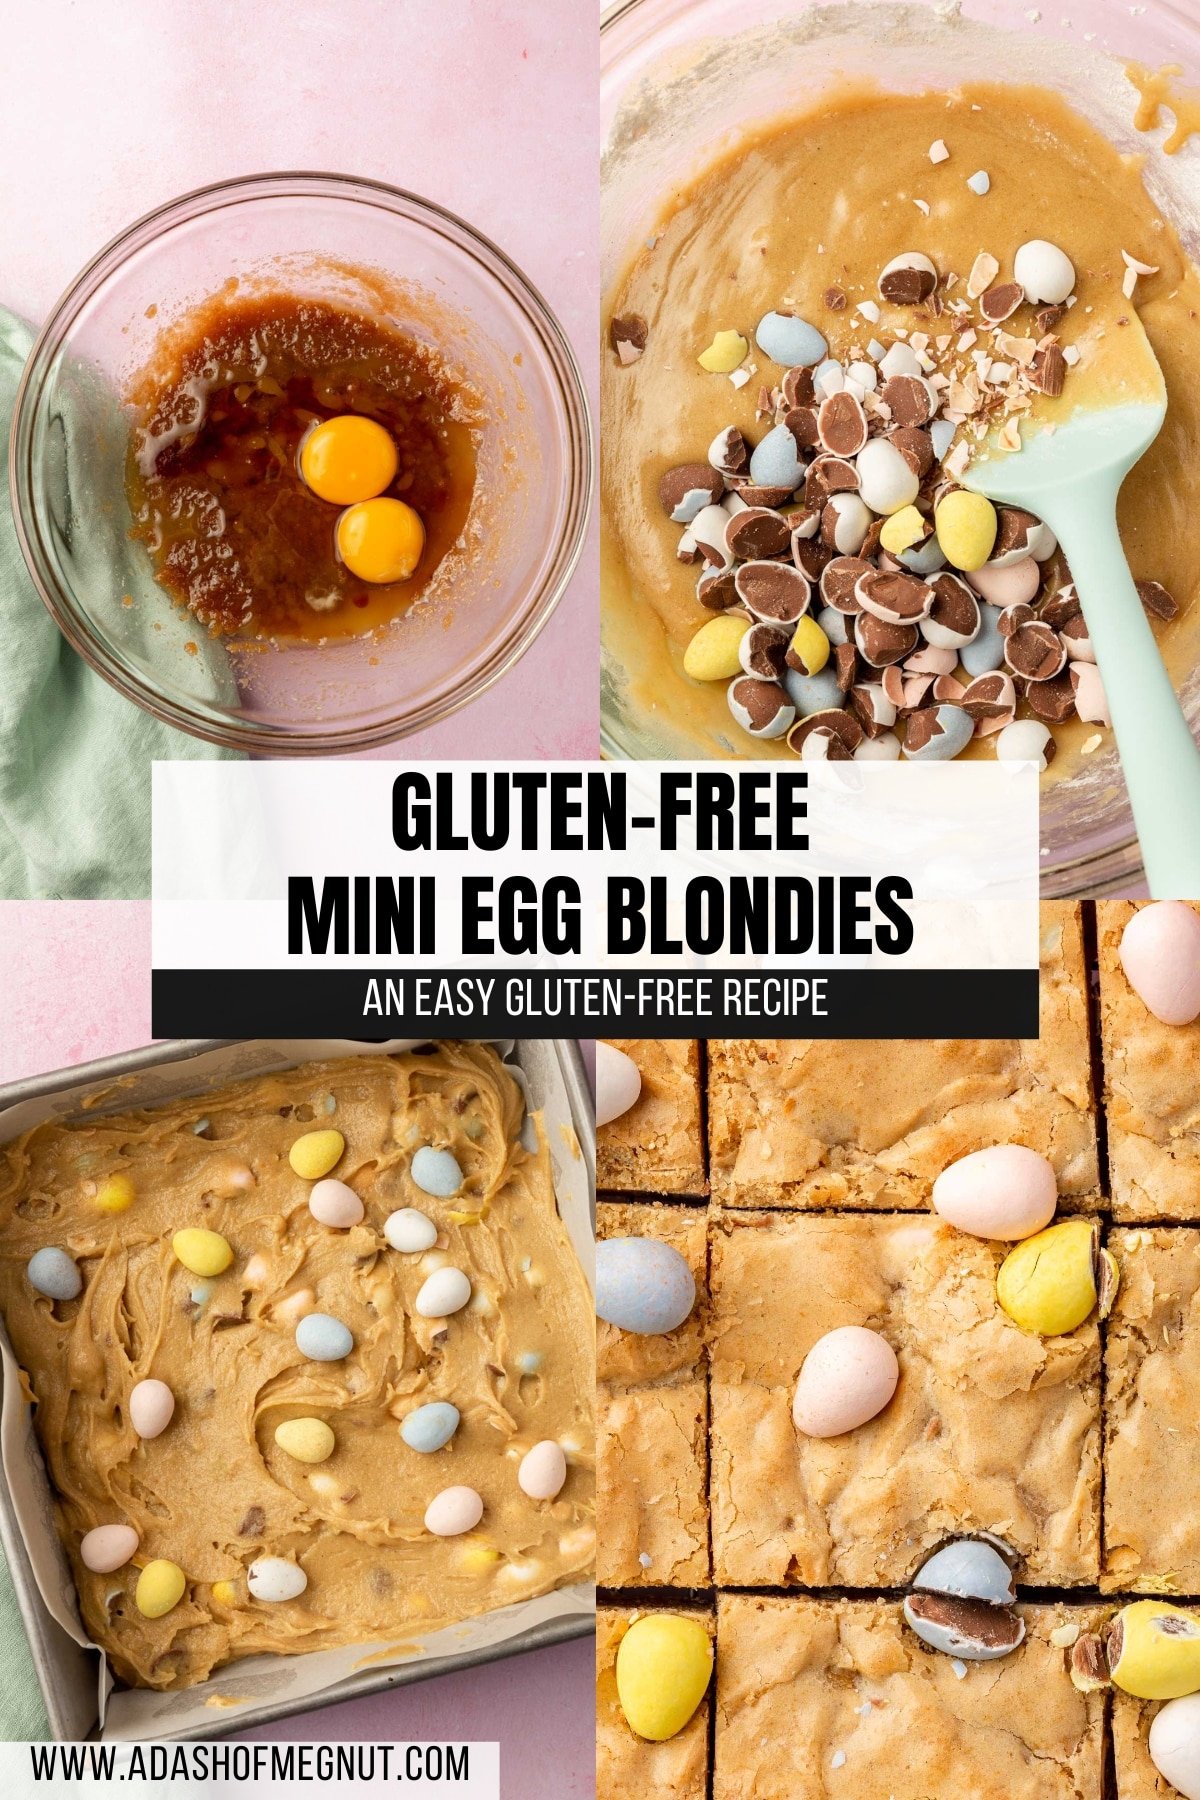 A four photo collage showing the process of making gluten-free mini egg blondies. Photo 1: A glass mixing bowl with a melted butter and brown sugar mixture topped with two raw eggs and vanilla before mixing together. Photo 2: A glass mixing bowl with gluten-free blondie batter topped with chopped up mini chocolate eggs. Photo 3: A square baking pan with blondie batter topped with mini chocolate eggs. Photo 4: Baked gluten-free blondies with mini cadbury eggs cut into 9 equal pieces.